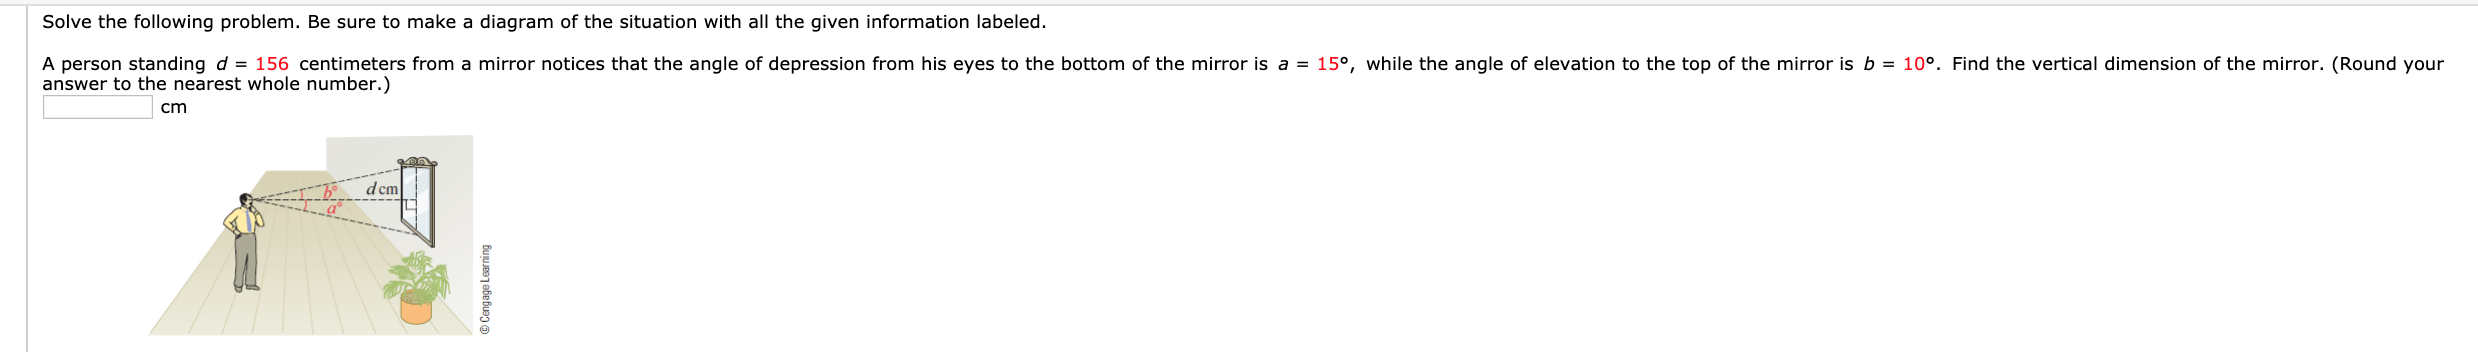 Solve the following problem. Be sure to make a diagram of the situation with all the given information labeled.
A person standing d = 156 centimeters from a mirror notices that the angle of depression from his eyes to the bottom of the mirror is a = 15°, while the angle of elevation to the top of the mirror is b = 10°. Find the vertical dimension of the mirror. (Round your
answer to the nearest whole number.)
dcm
© Cengage Learning
